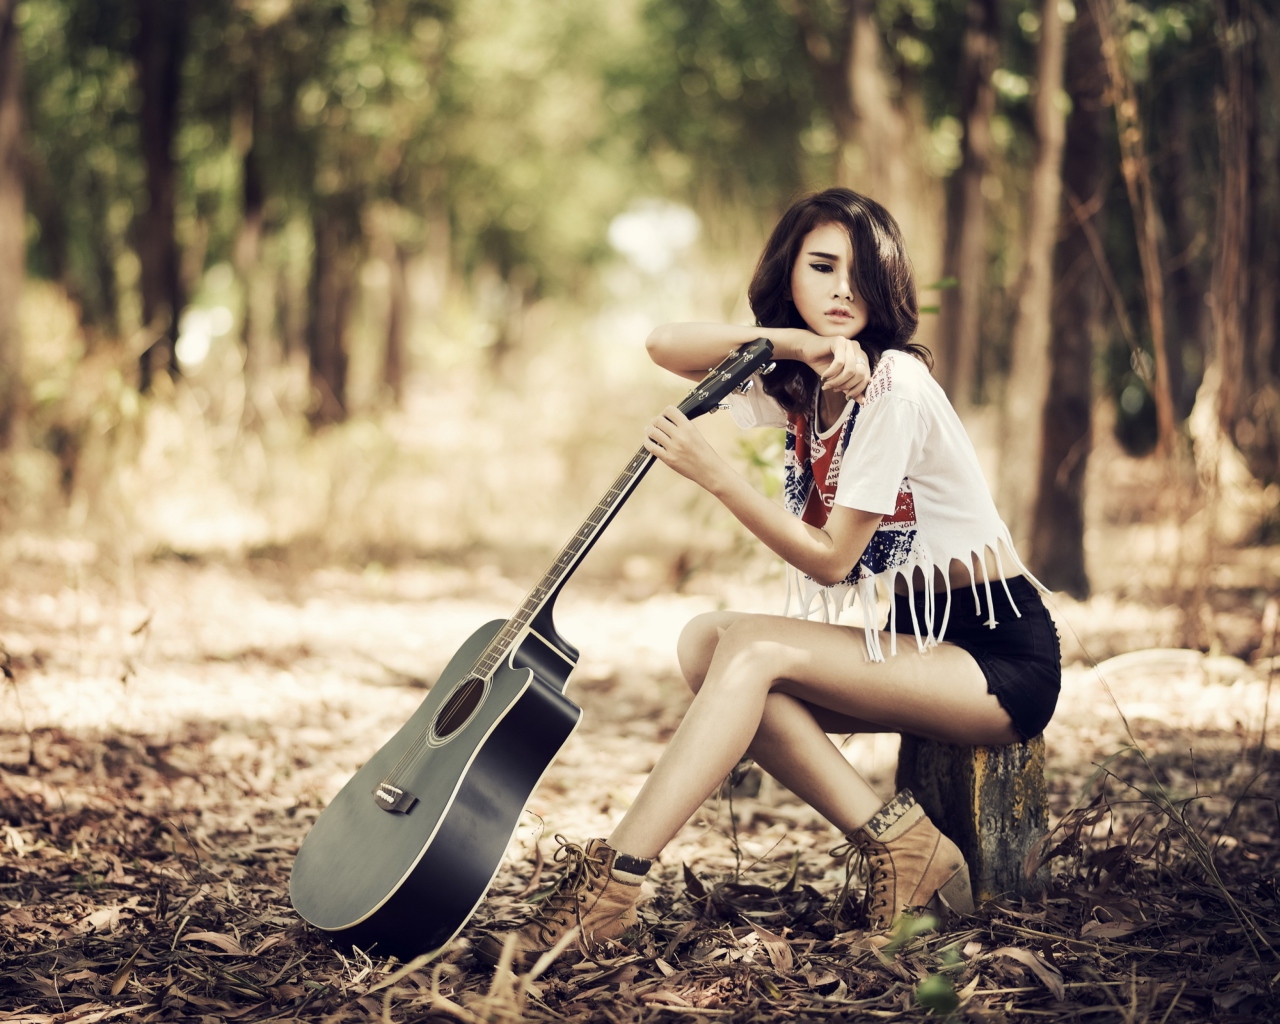 Pretty Brunette Model With Guitar At Meadow wallpaper 1280x1024